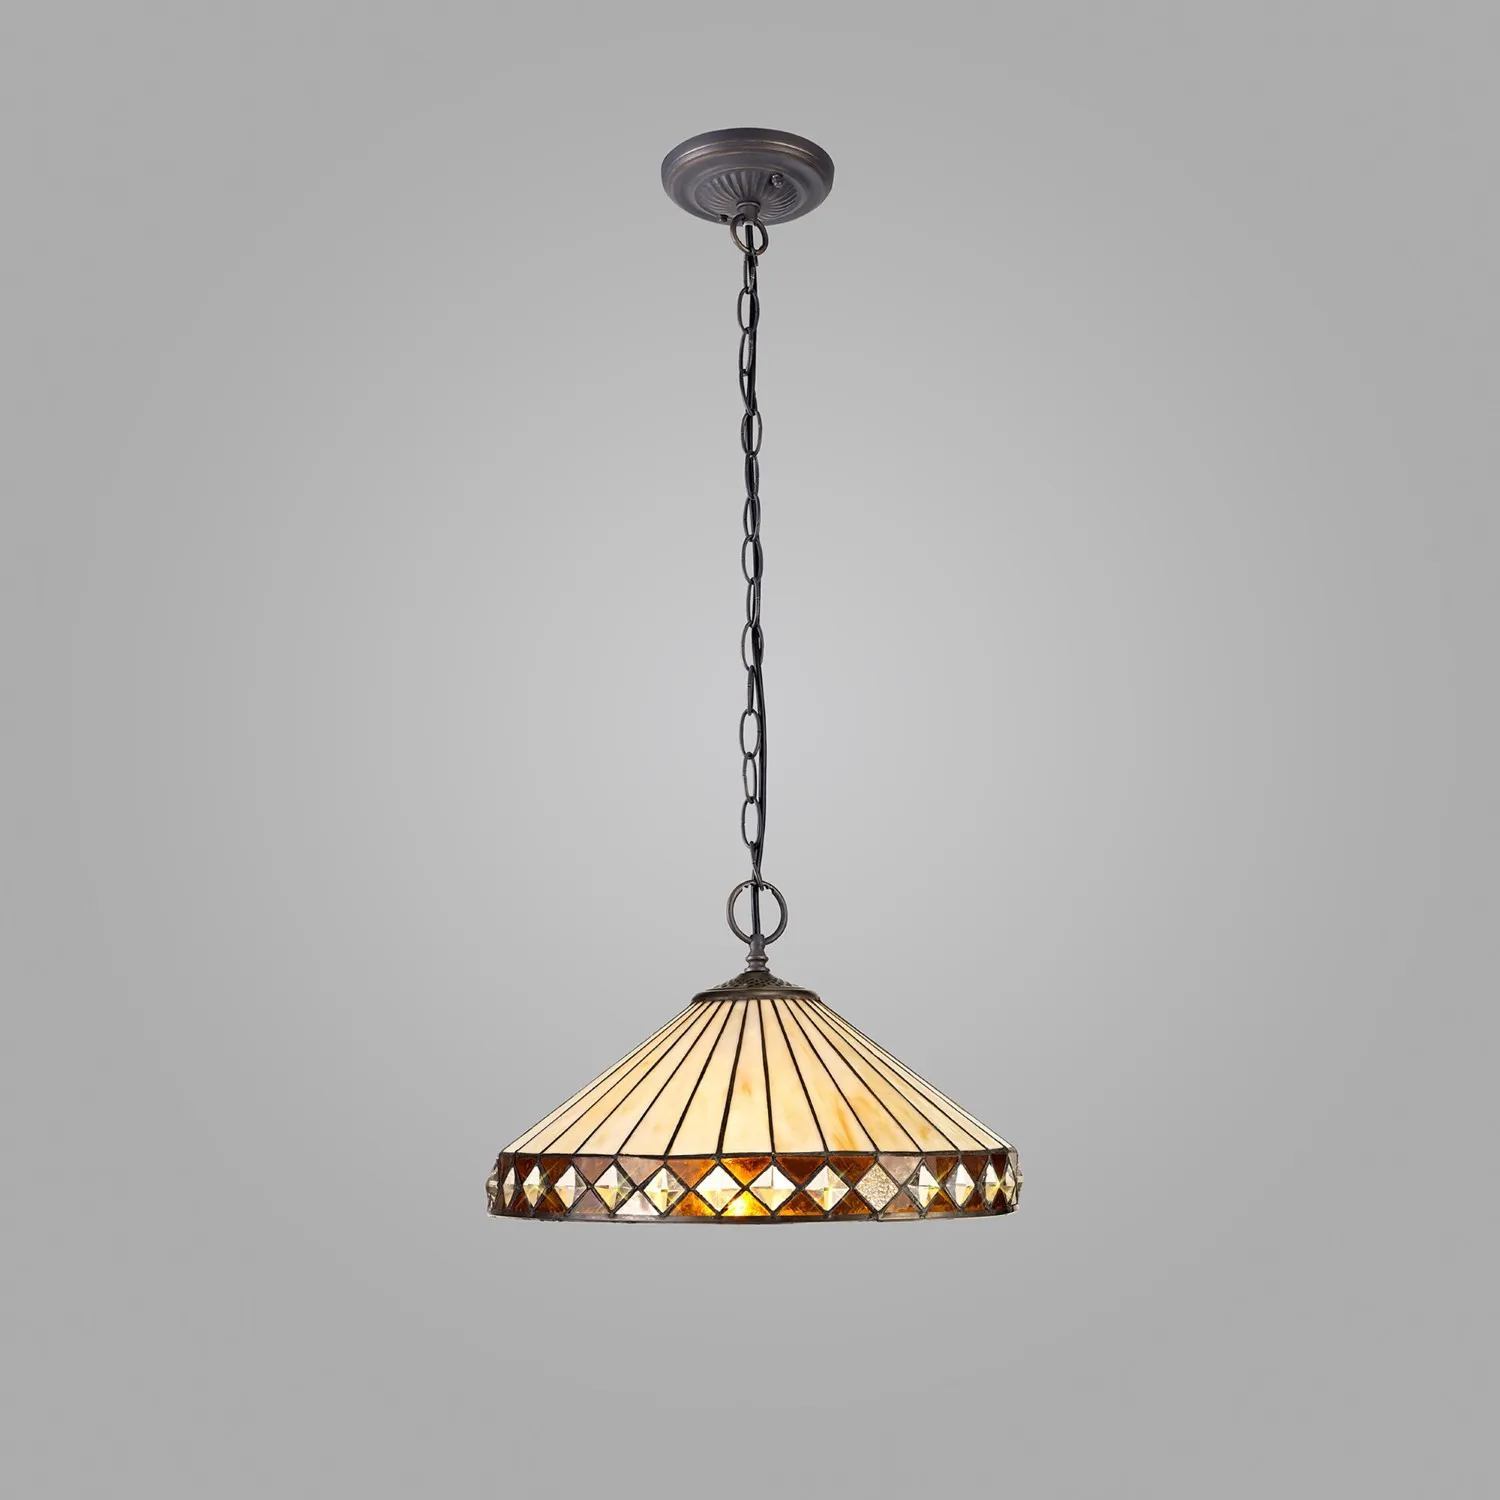 Rayleigh 2 Light Downlighter Pendant E27 With 40cm Tiffany Shade, Amber Cream Crystal Aged Antique Brass